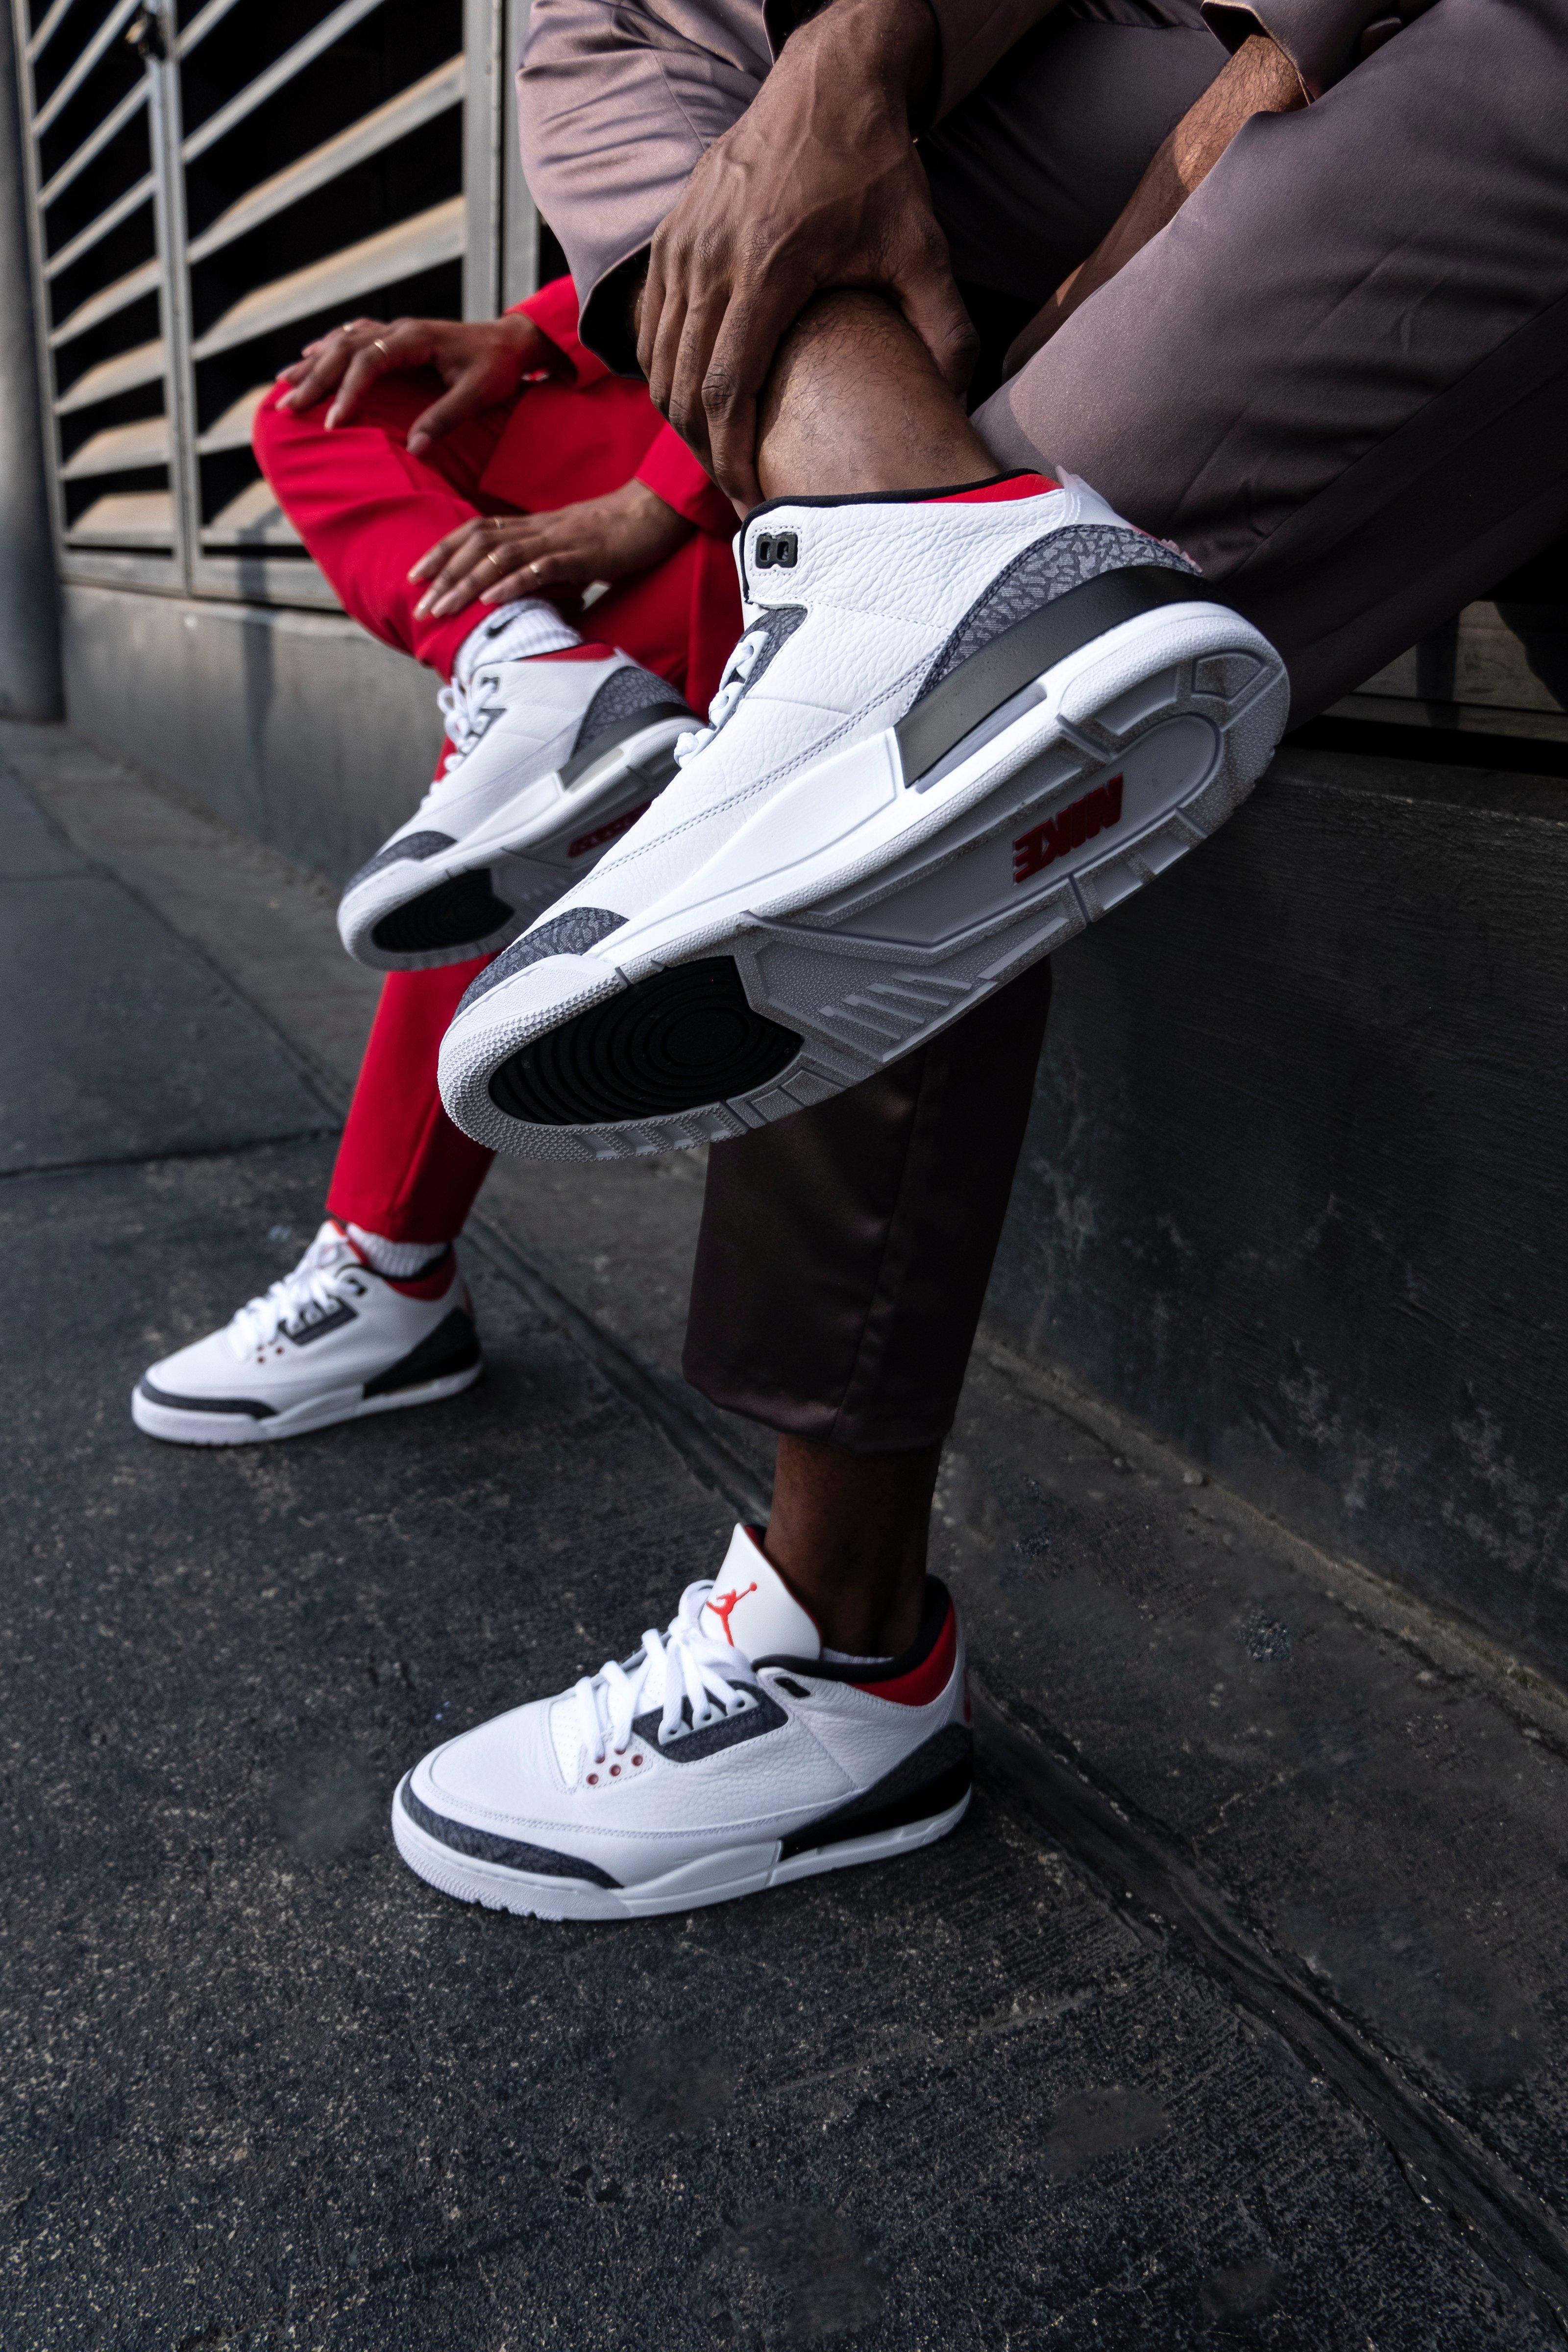 jordan 3 fire red outfit